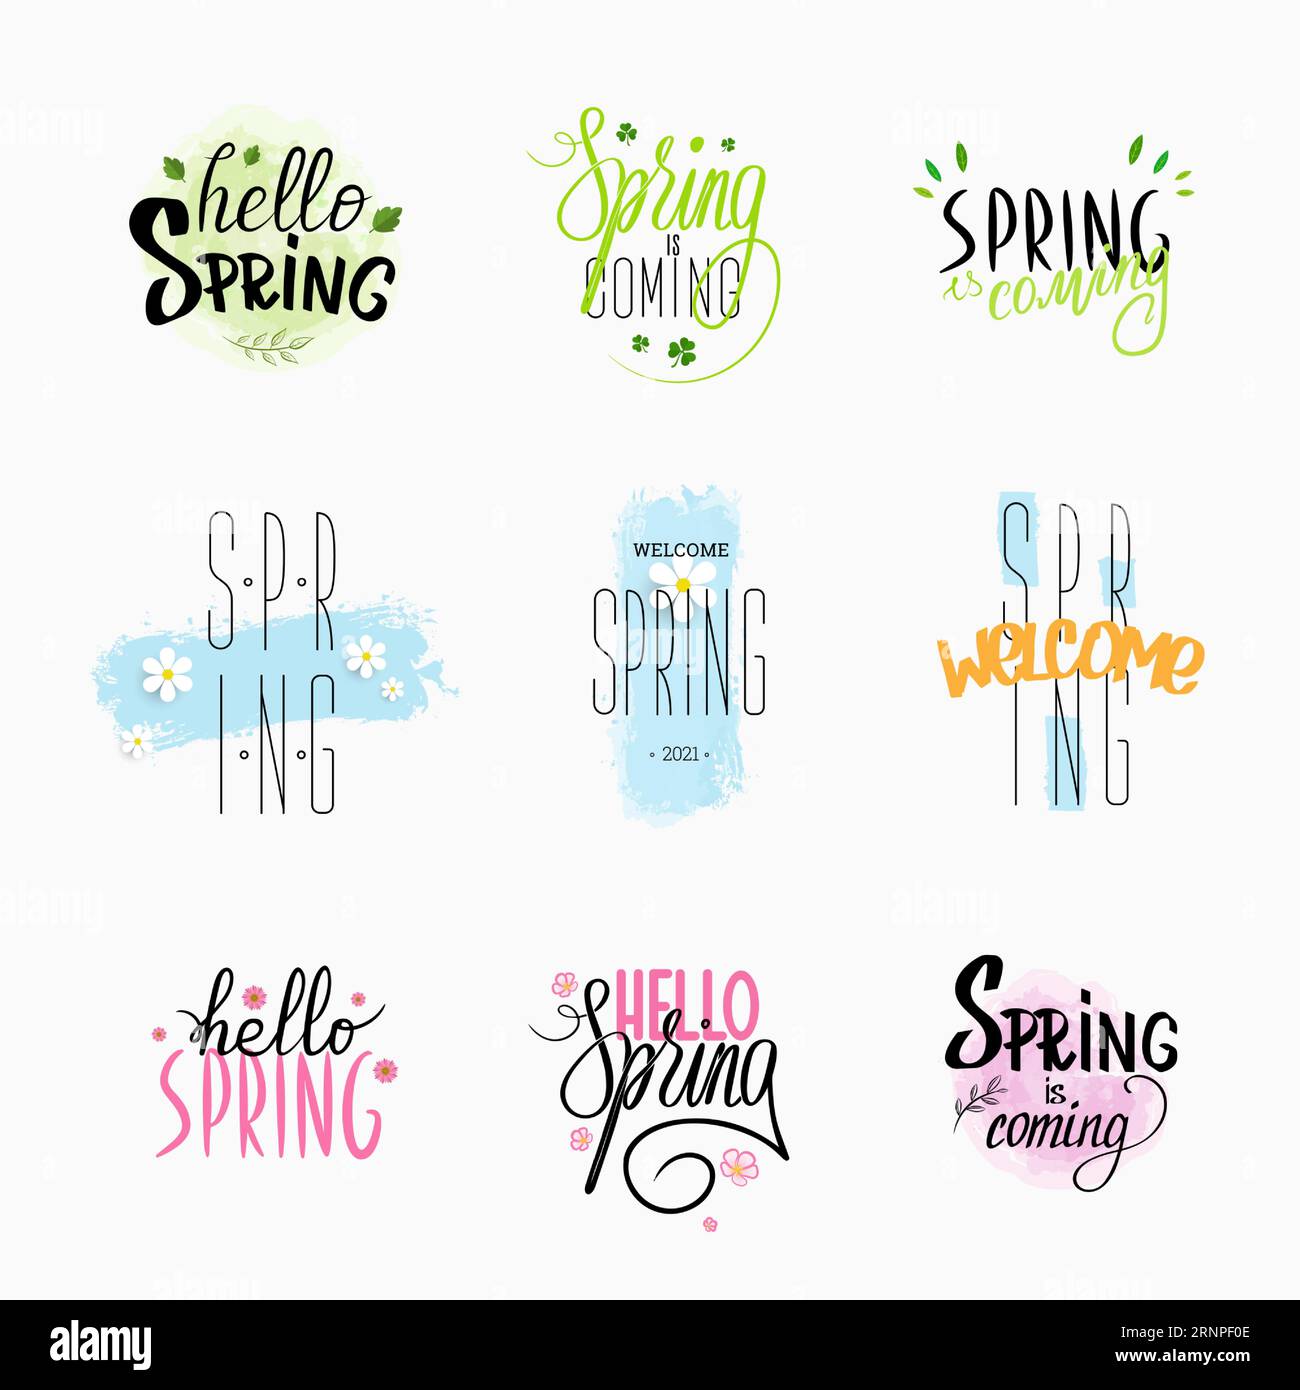 Vector illustration with handwritten lettering of spring greetings, green, pink, blue decor. Set of calligraphic compositions. Motivational text prese Stock Vector